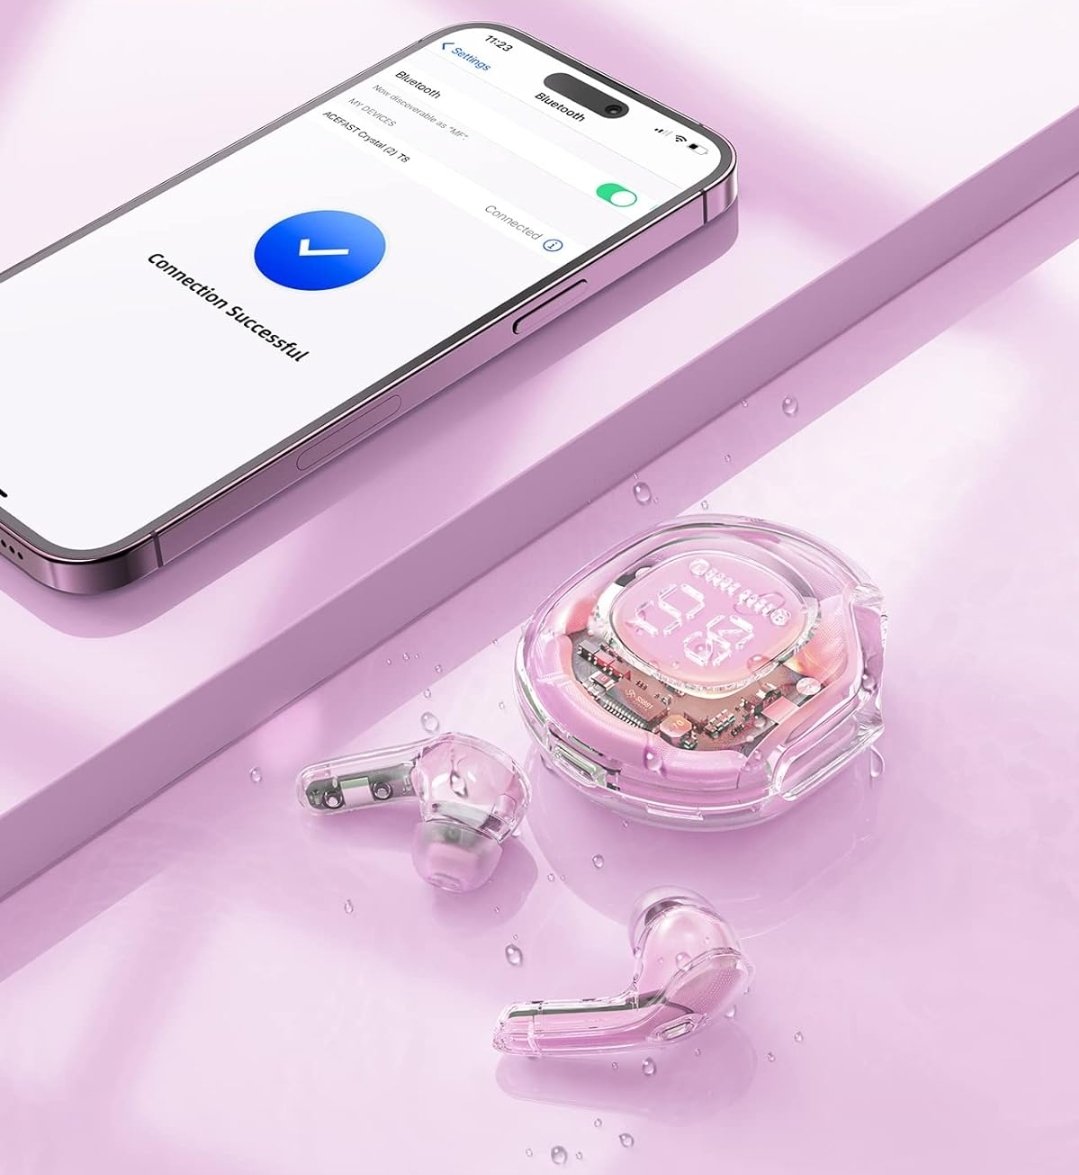 Experience crystal-clear sound on-the-go with ACEFAST T8 Wireless Earphones. Stay connected with Bluetooth 5.3 technology, touch control features, and wireless charging capabilities. Perfect for sports and waterproof too!  #WirelessEarphones 

👇

🛍 amzn.to/3Qz9nGq